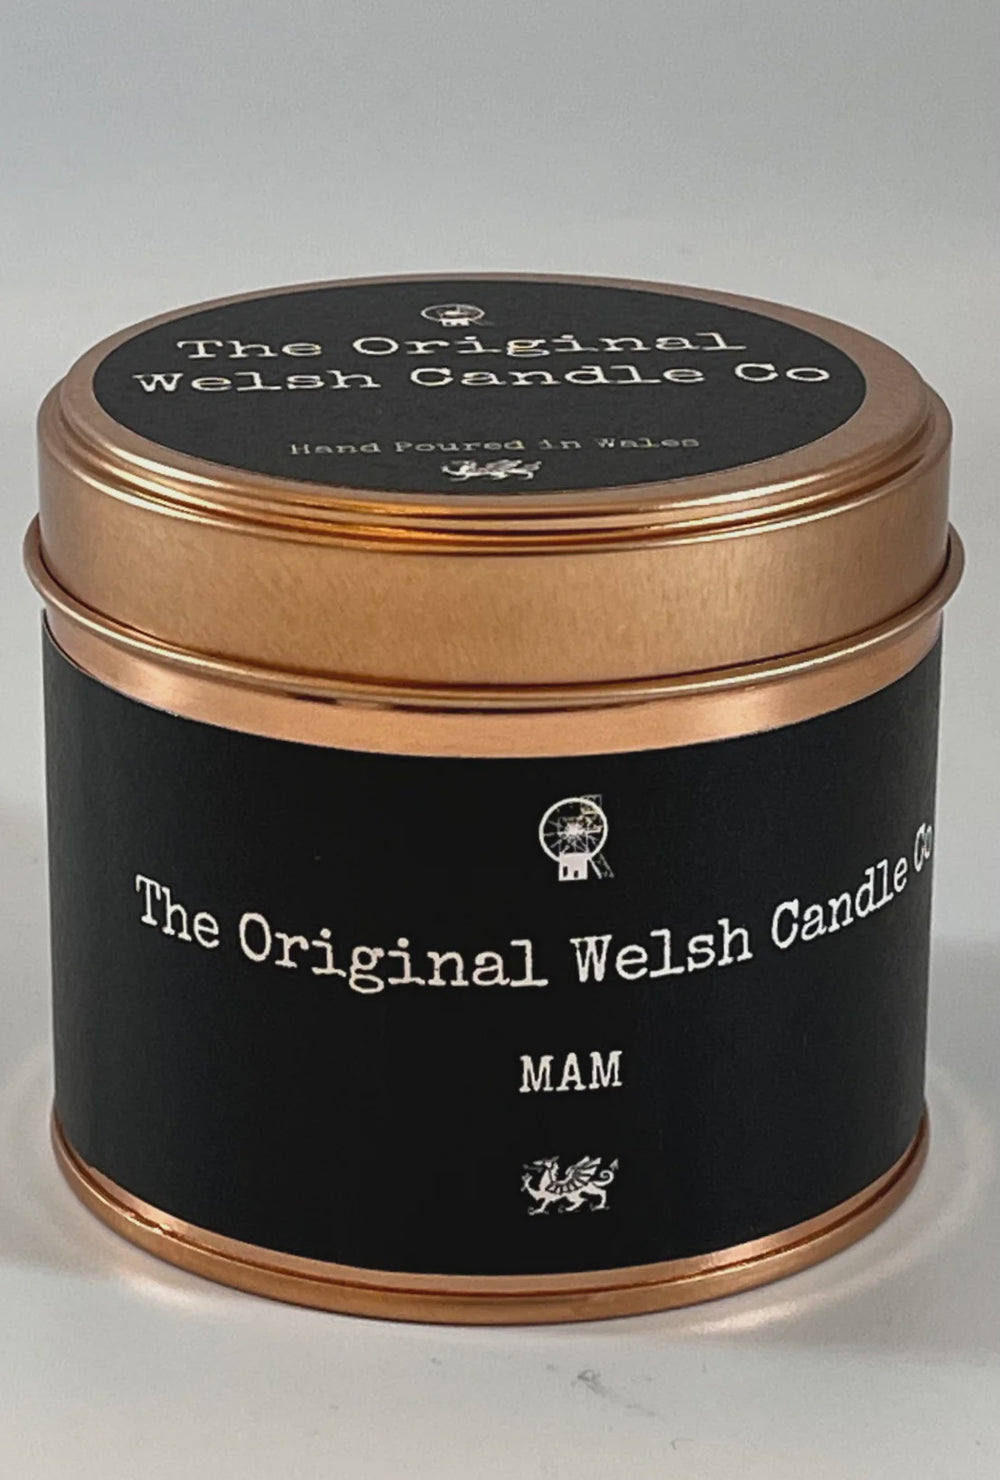 The Original Welsh Candle Co Mam Candle Tin